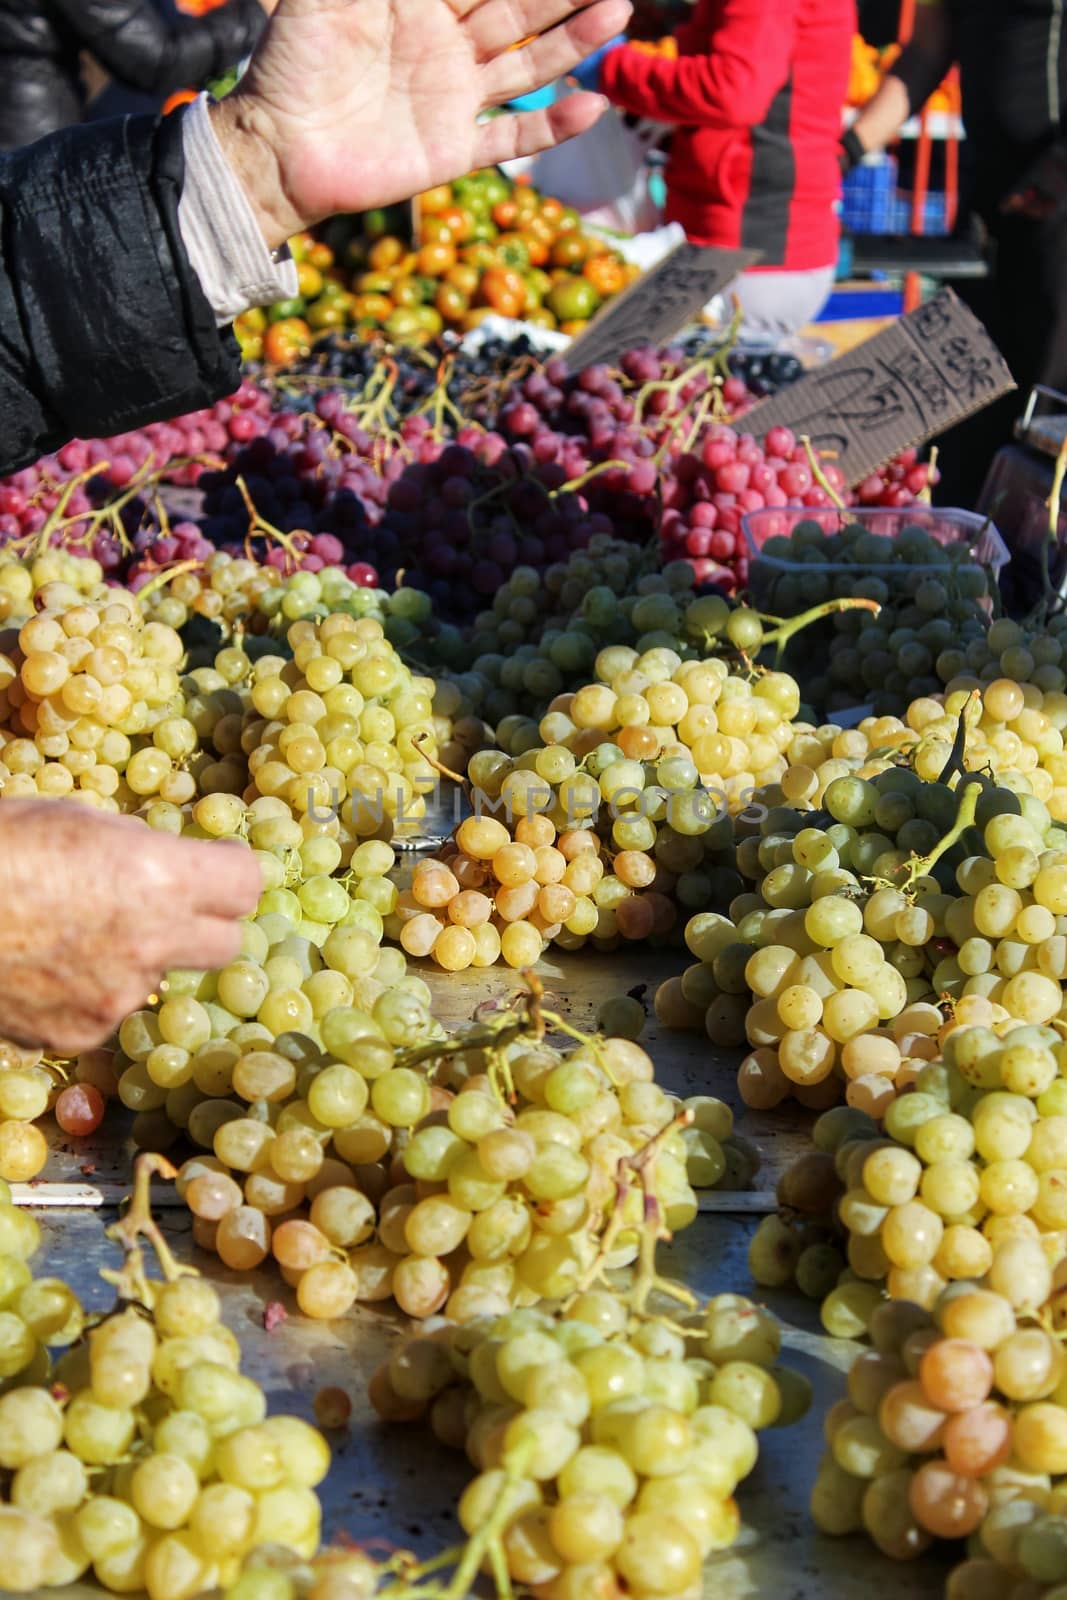 Cluster of grapes at a market stall in Santa Pola, Alicante, Spain